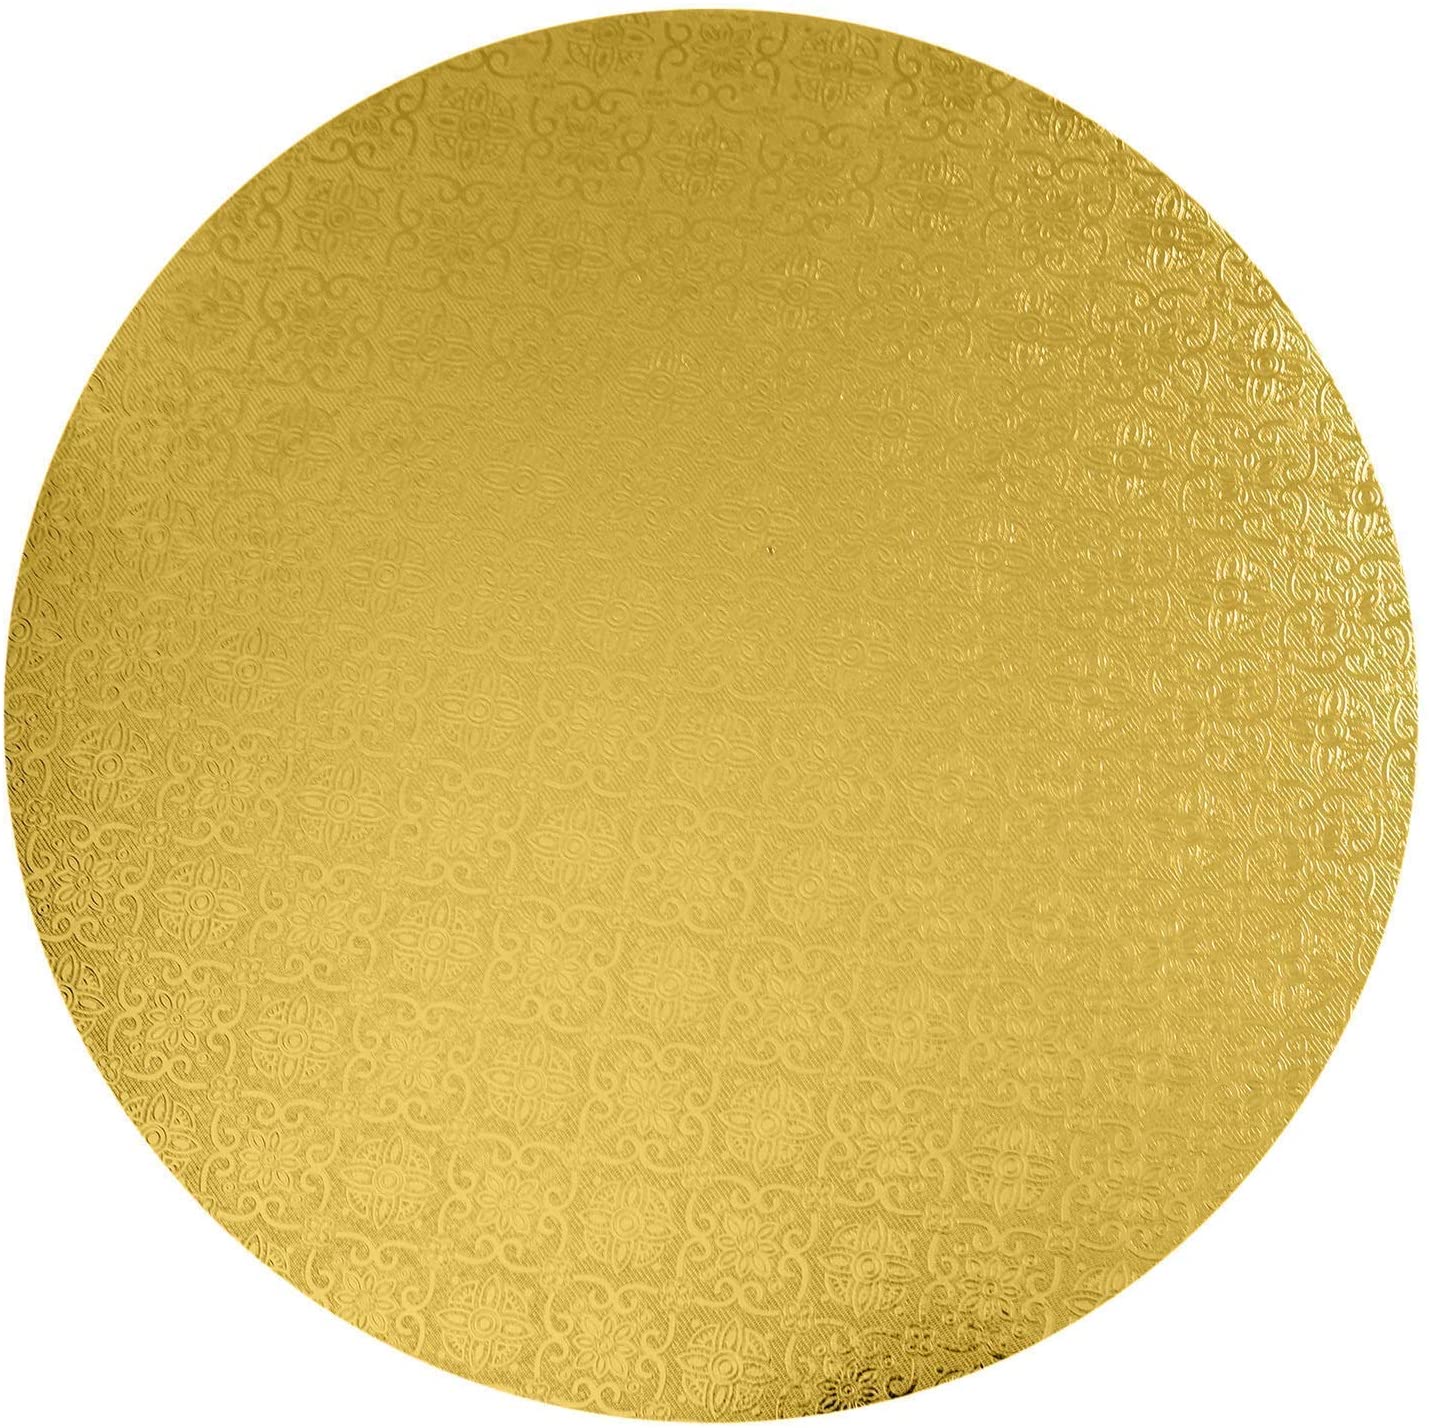 Thin Gold Round Cake Boards | Easy Bake Supplies